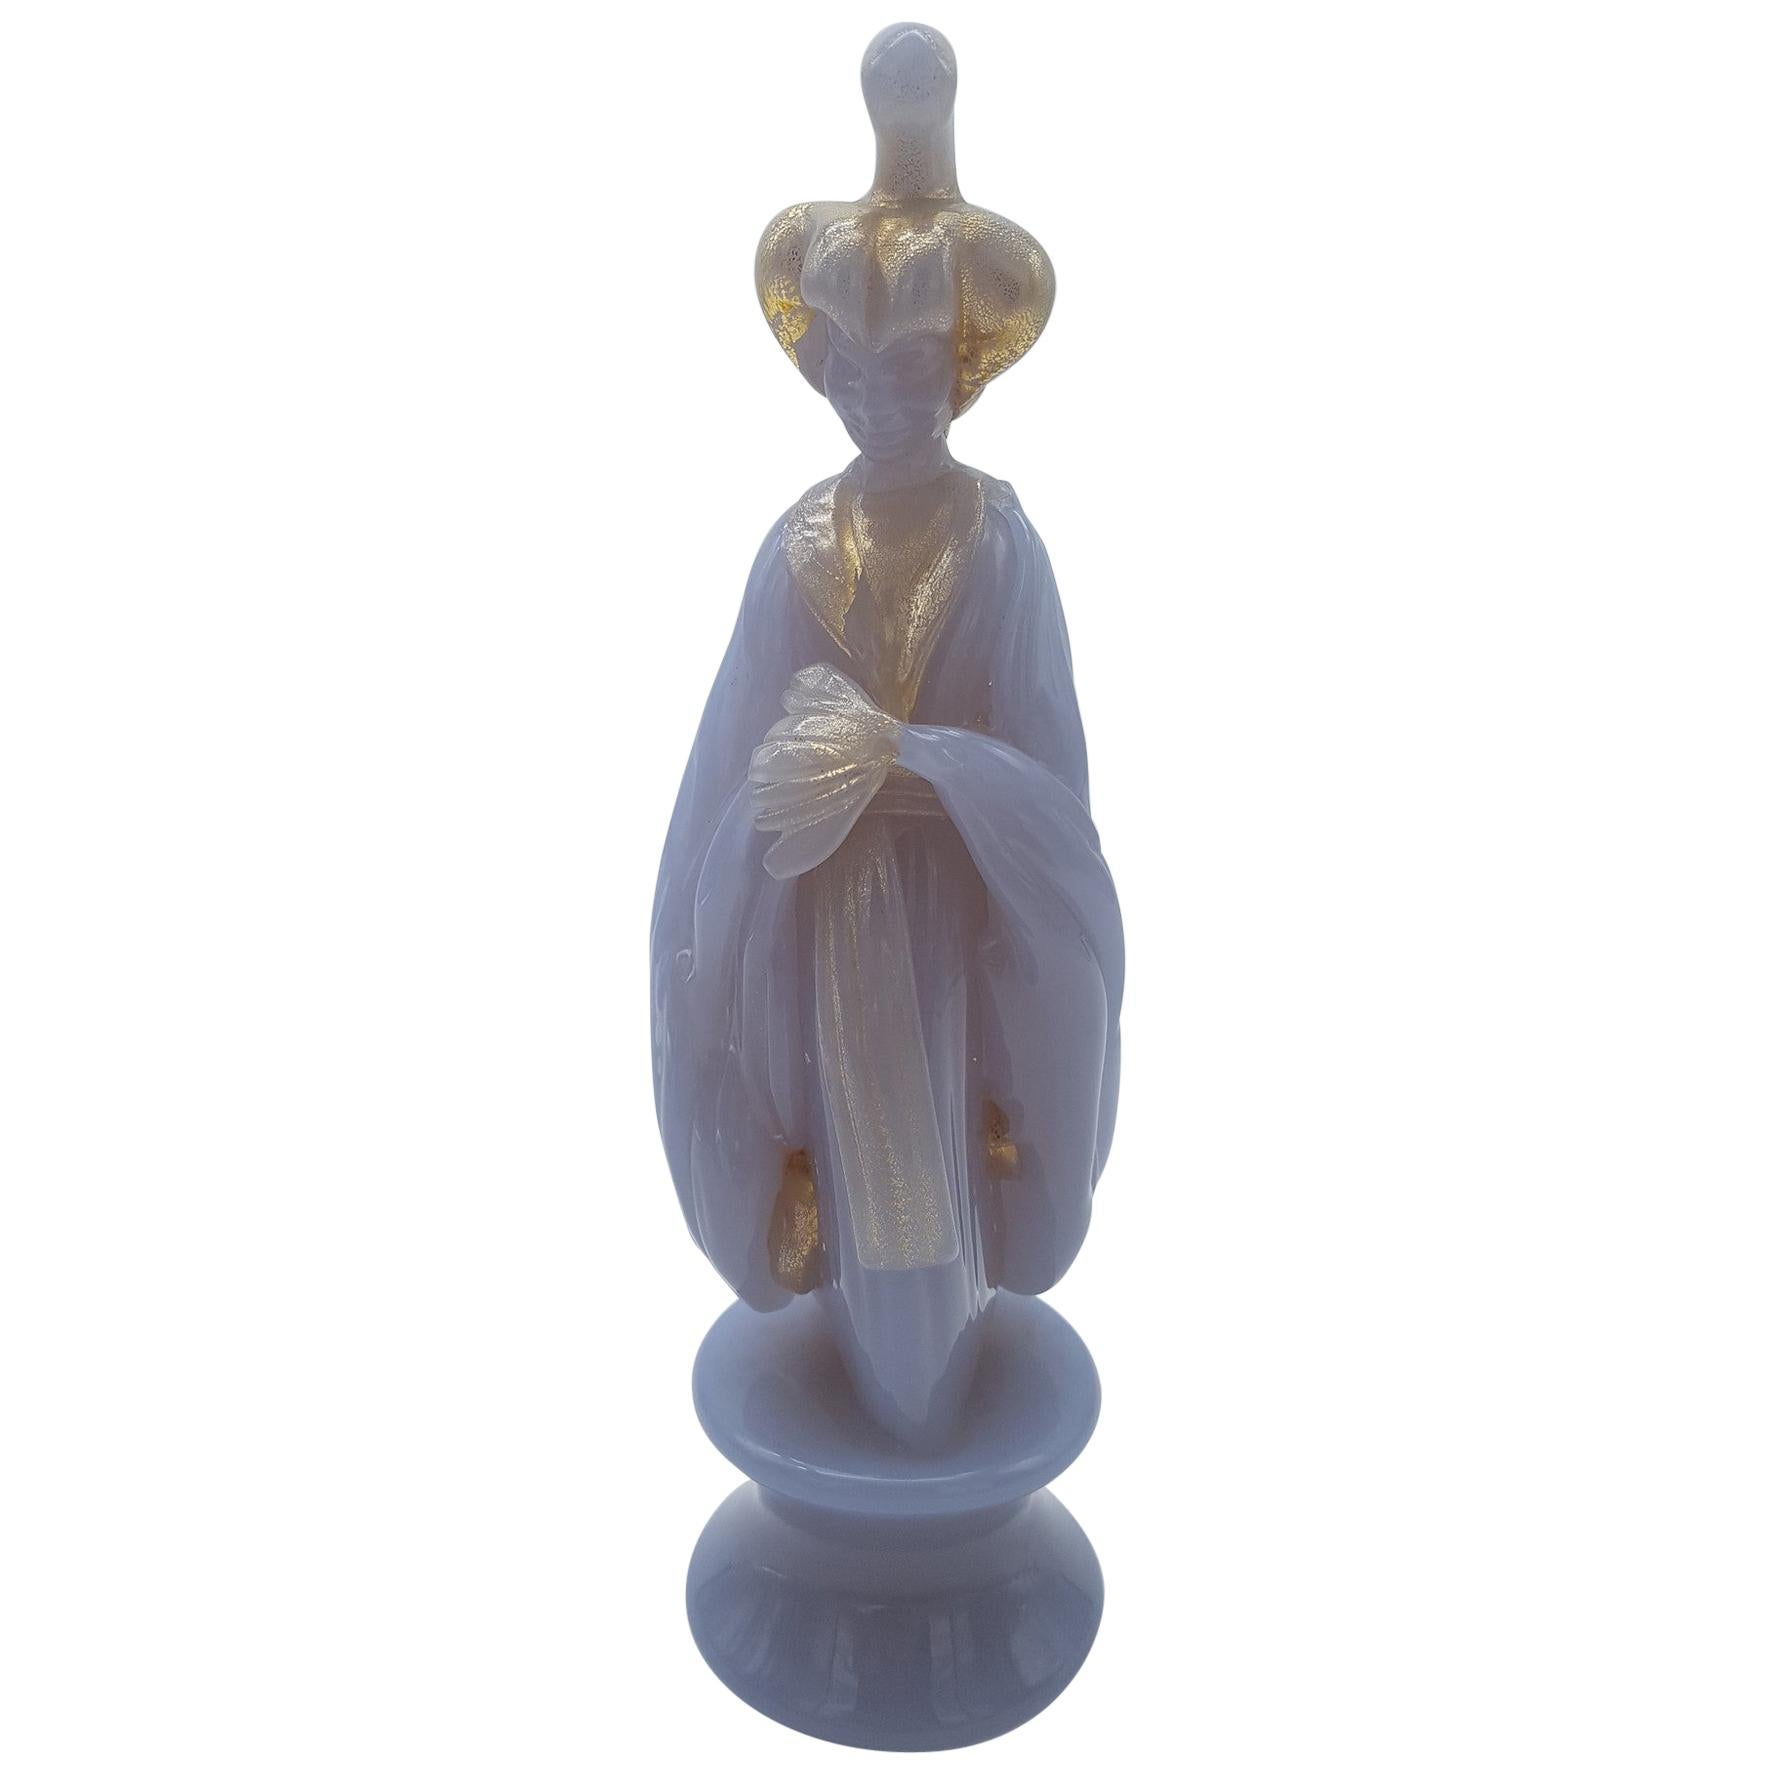 Vintage Murano Glass Geisha Figurine by Ermanno Nason at Cenedese, Late 1960s For Sale